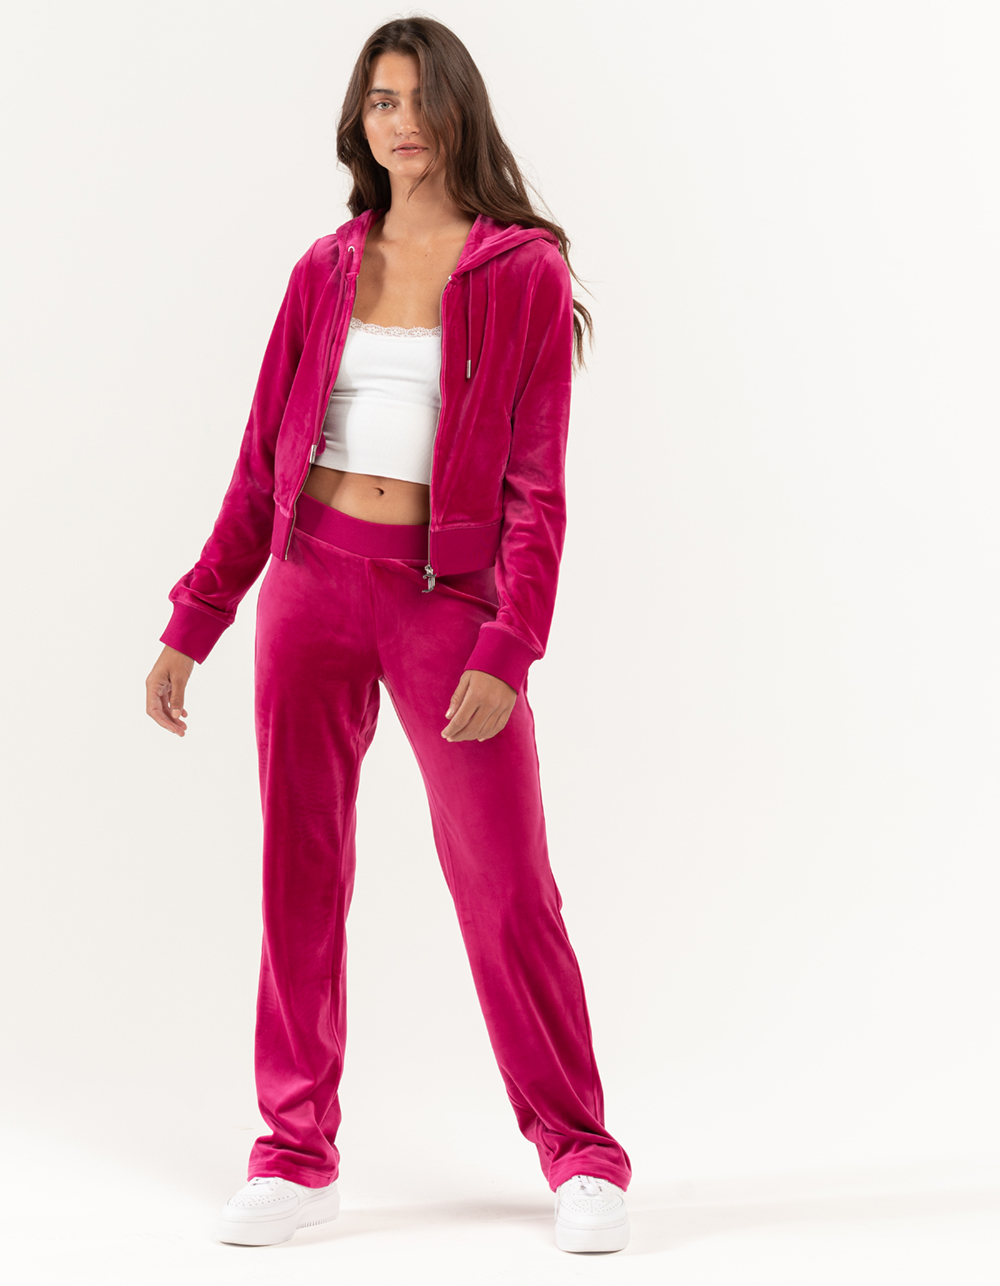 JUICY COUTURE OG Bling Womens Pants - RASPBERRY | Tillys